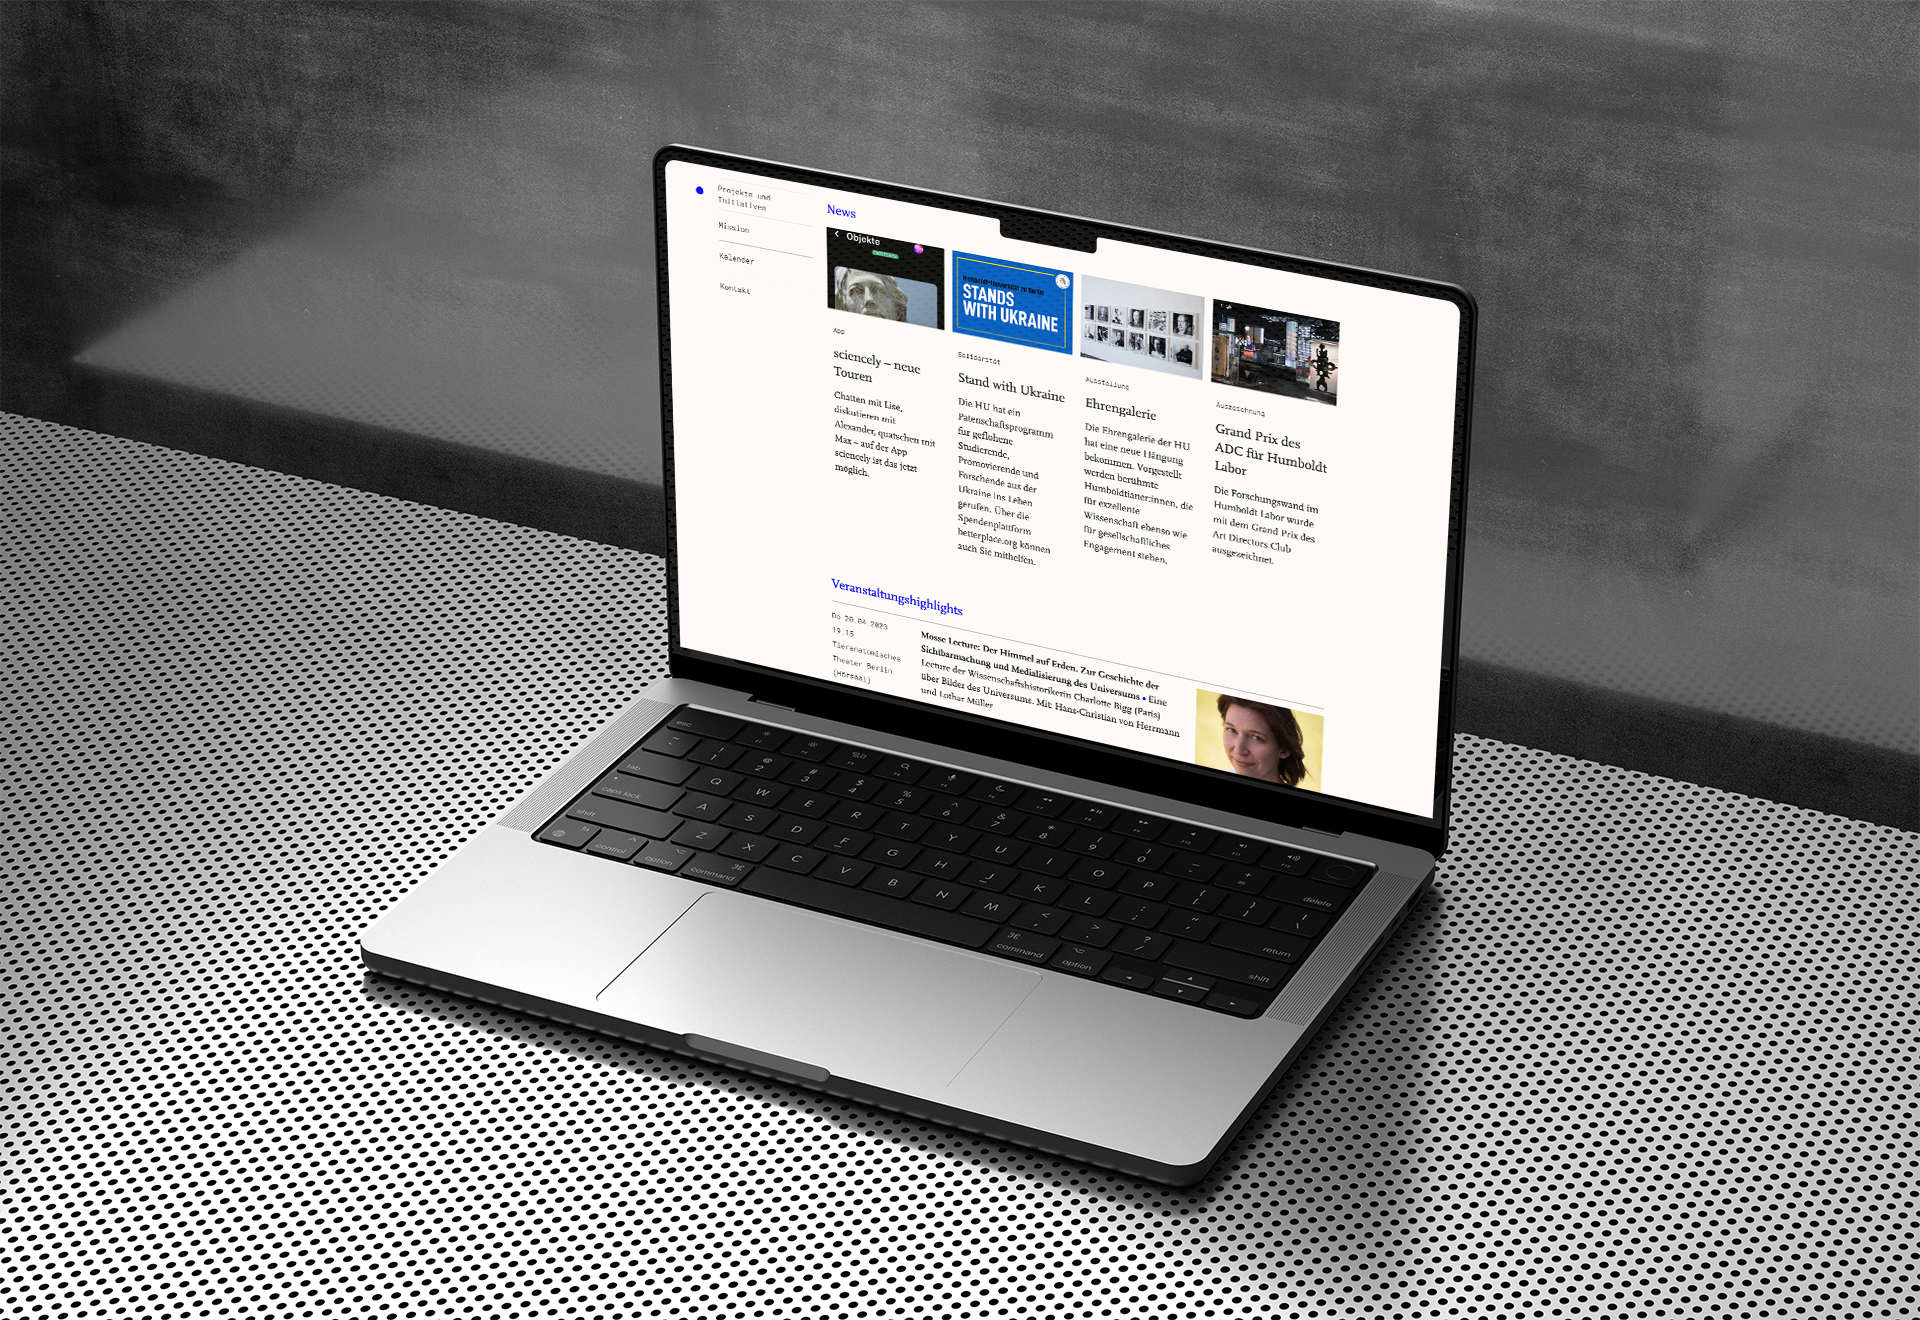 A mockup of a laptop in a cool metallic environment showing a clean page in grey tones featuring some event tiles.